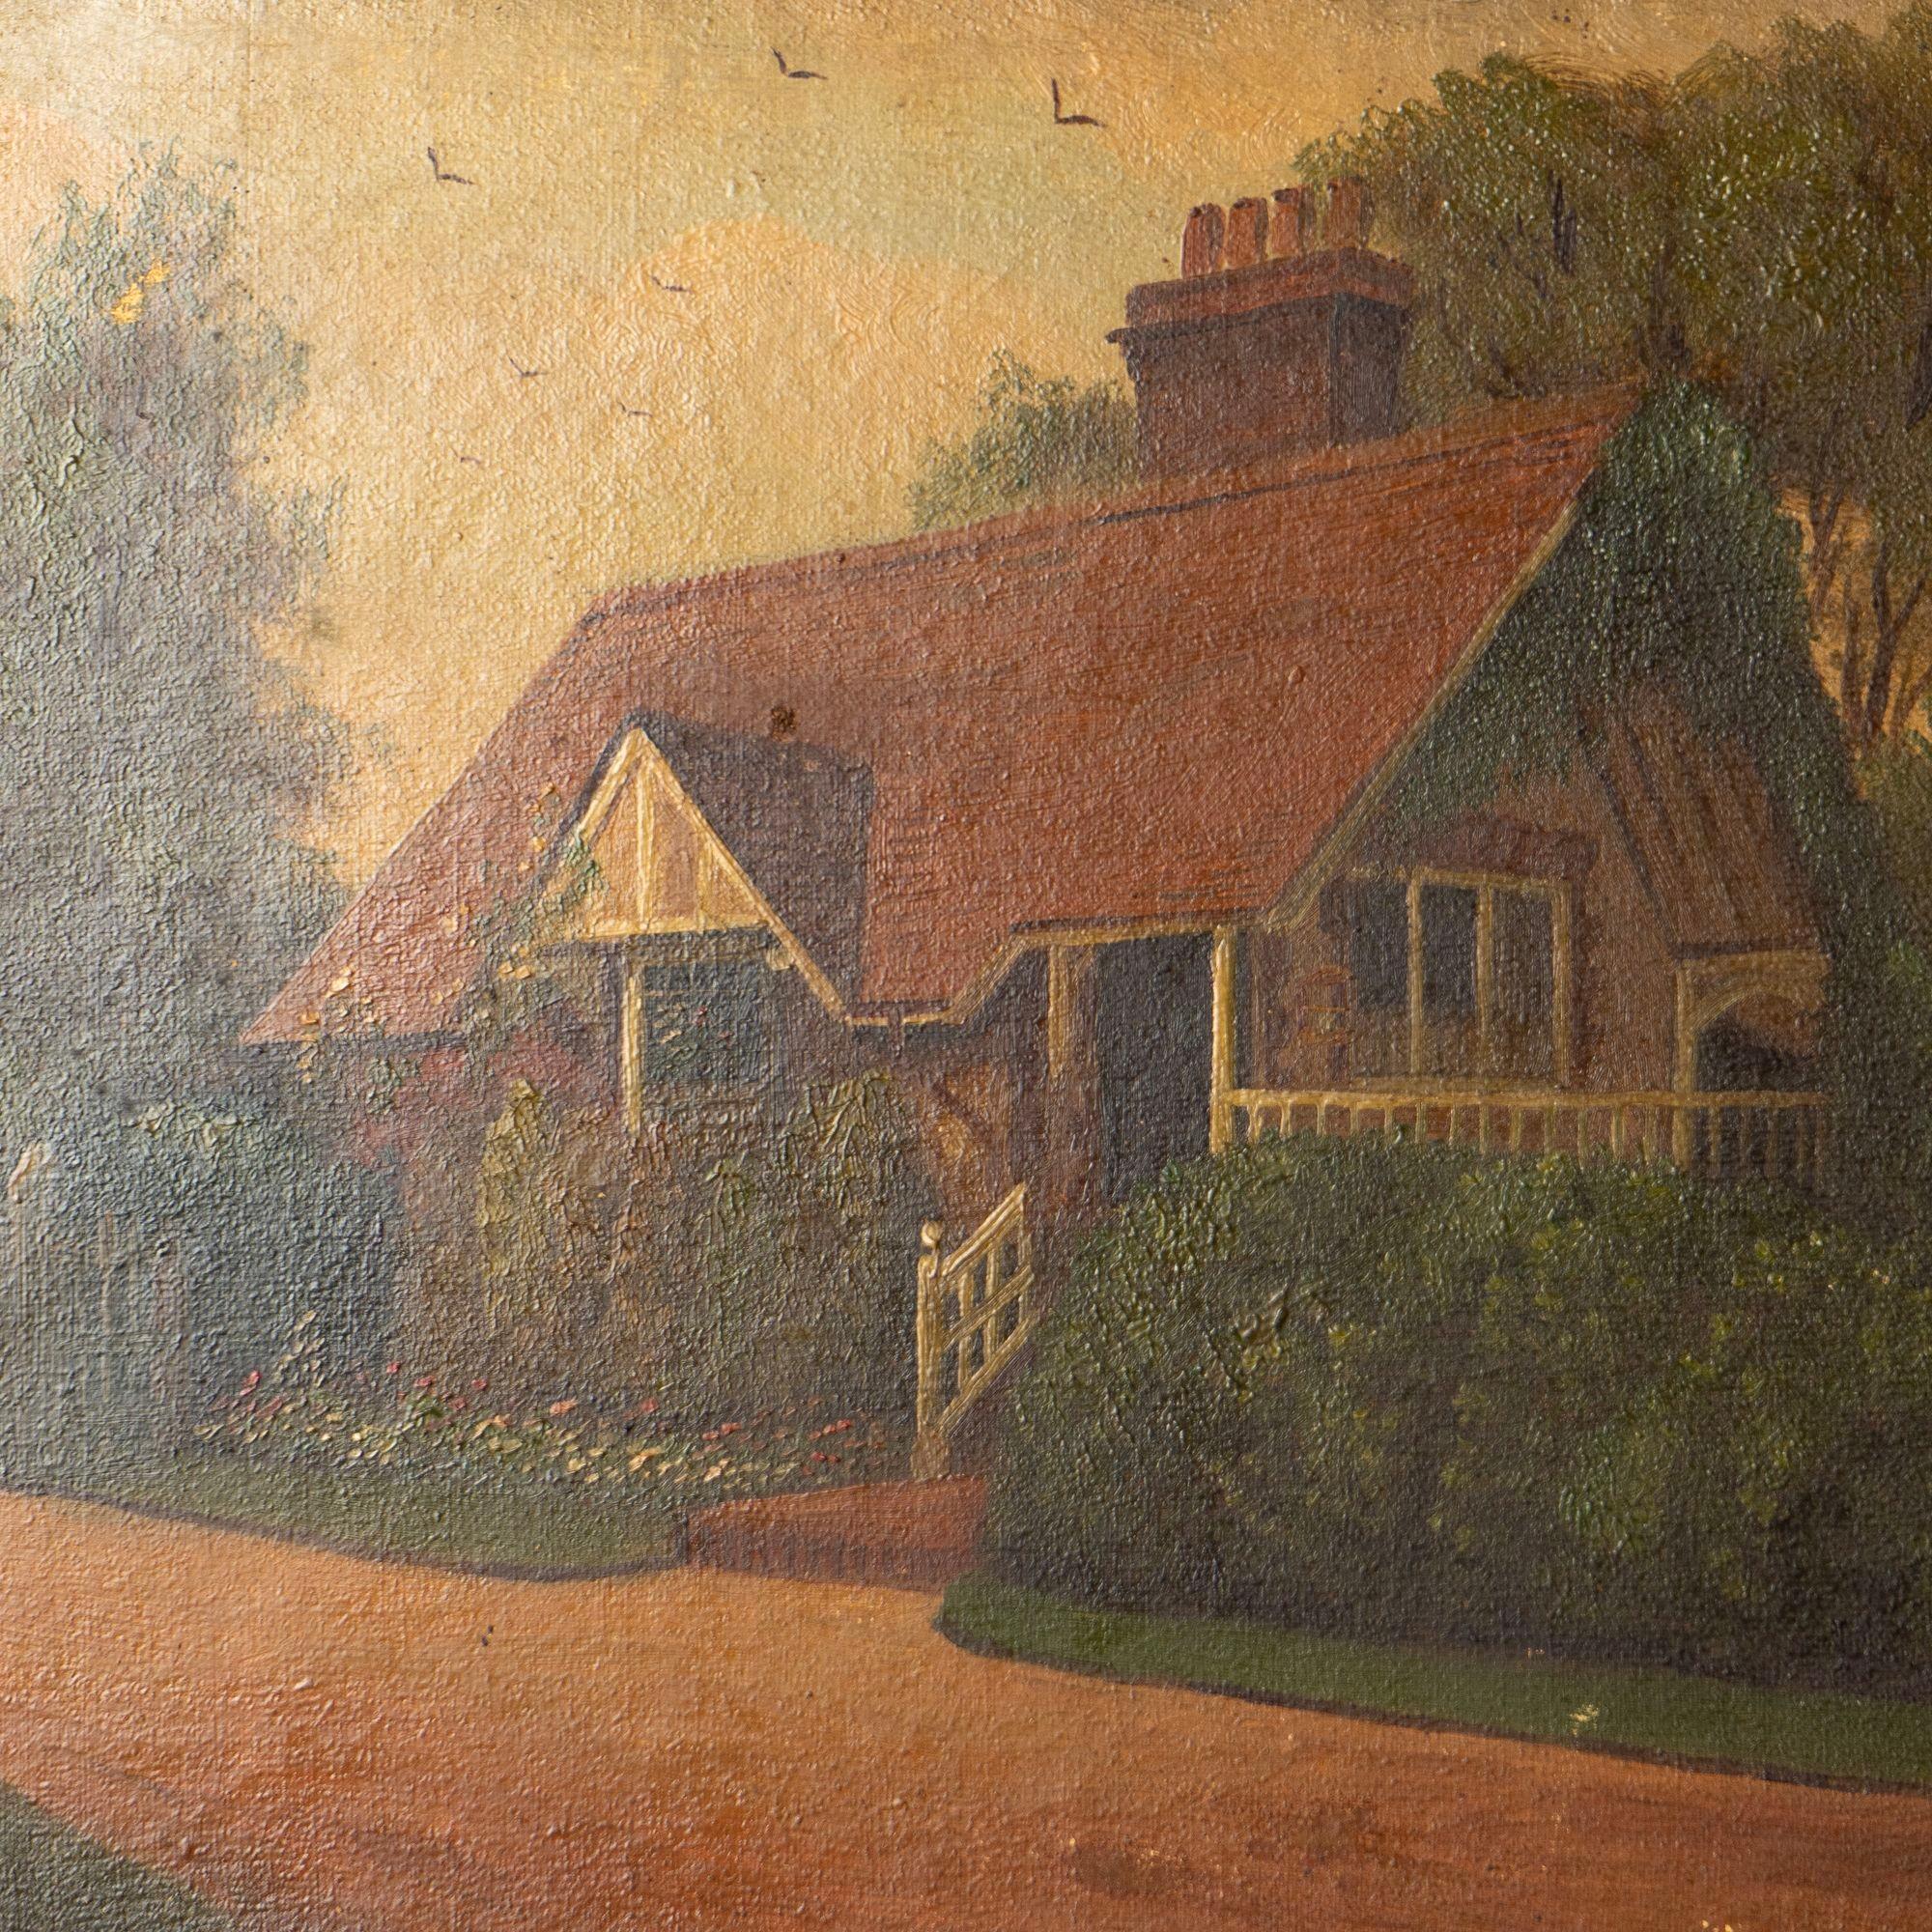 Antique edwardian original oil on canvas folk art painting
by Francis Vingoe (1879-1940)
Vingoe used to travel around door to door, mainly in Berkshire and Oxfordshire showing examples of his work and asking people if they would like him to paint